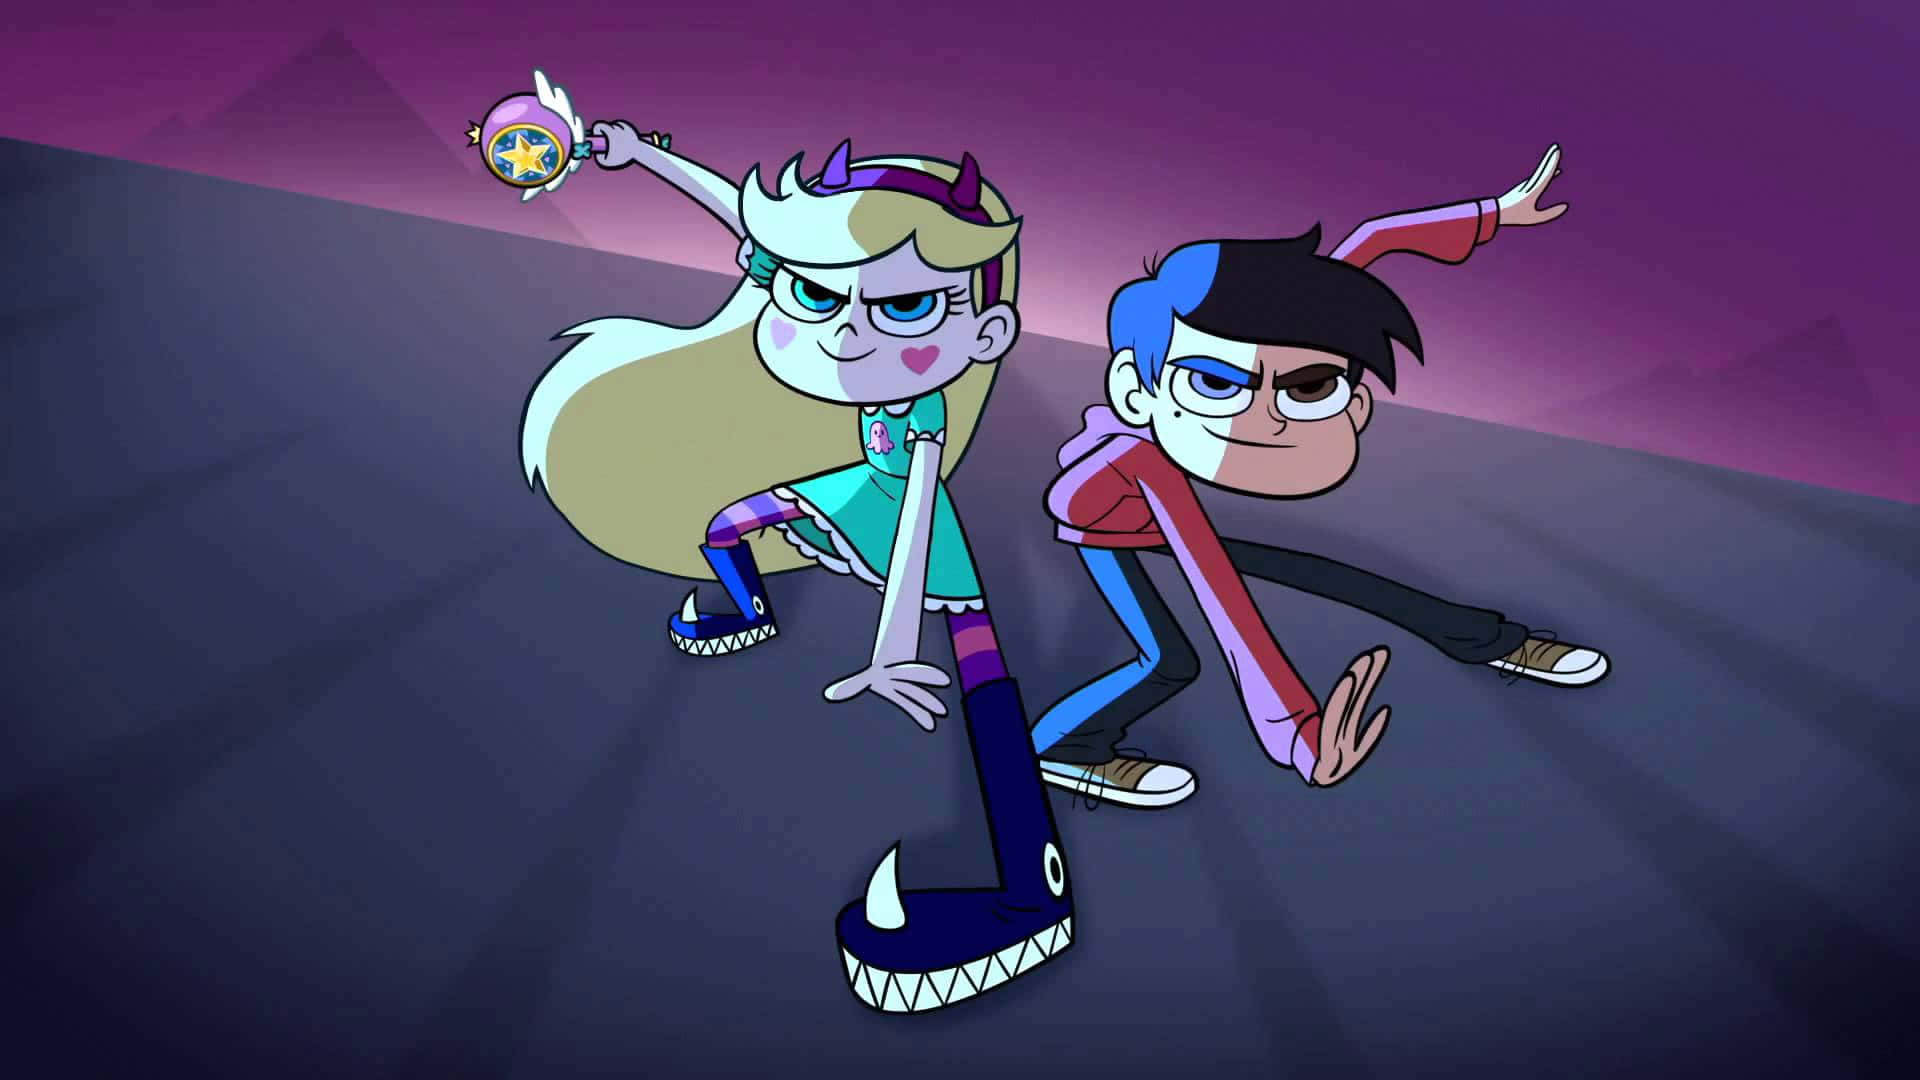 Caption: Star Butterfly and Marco Diaz in Star Vs. The Forces of Evil magical adventure